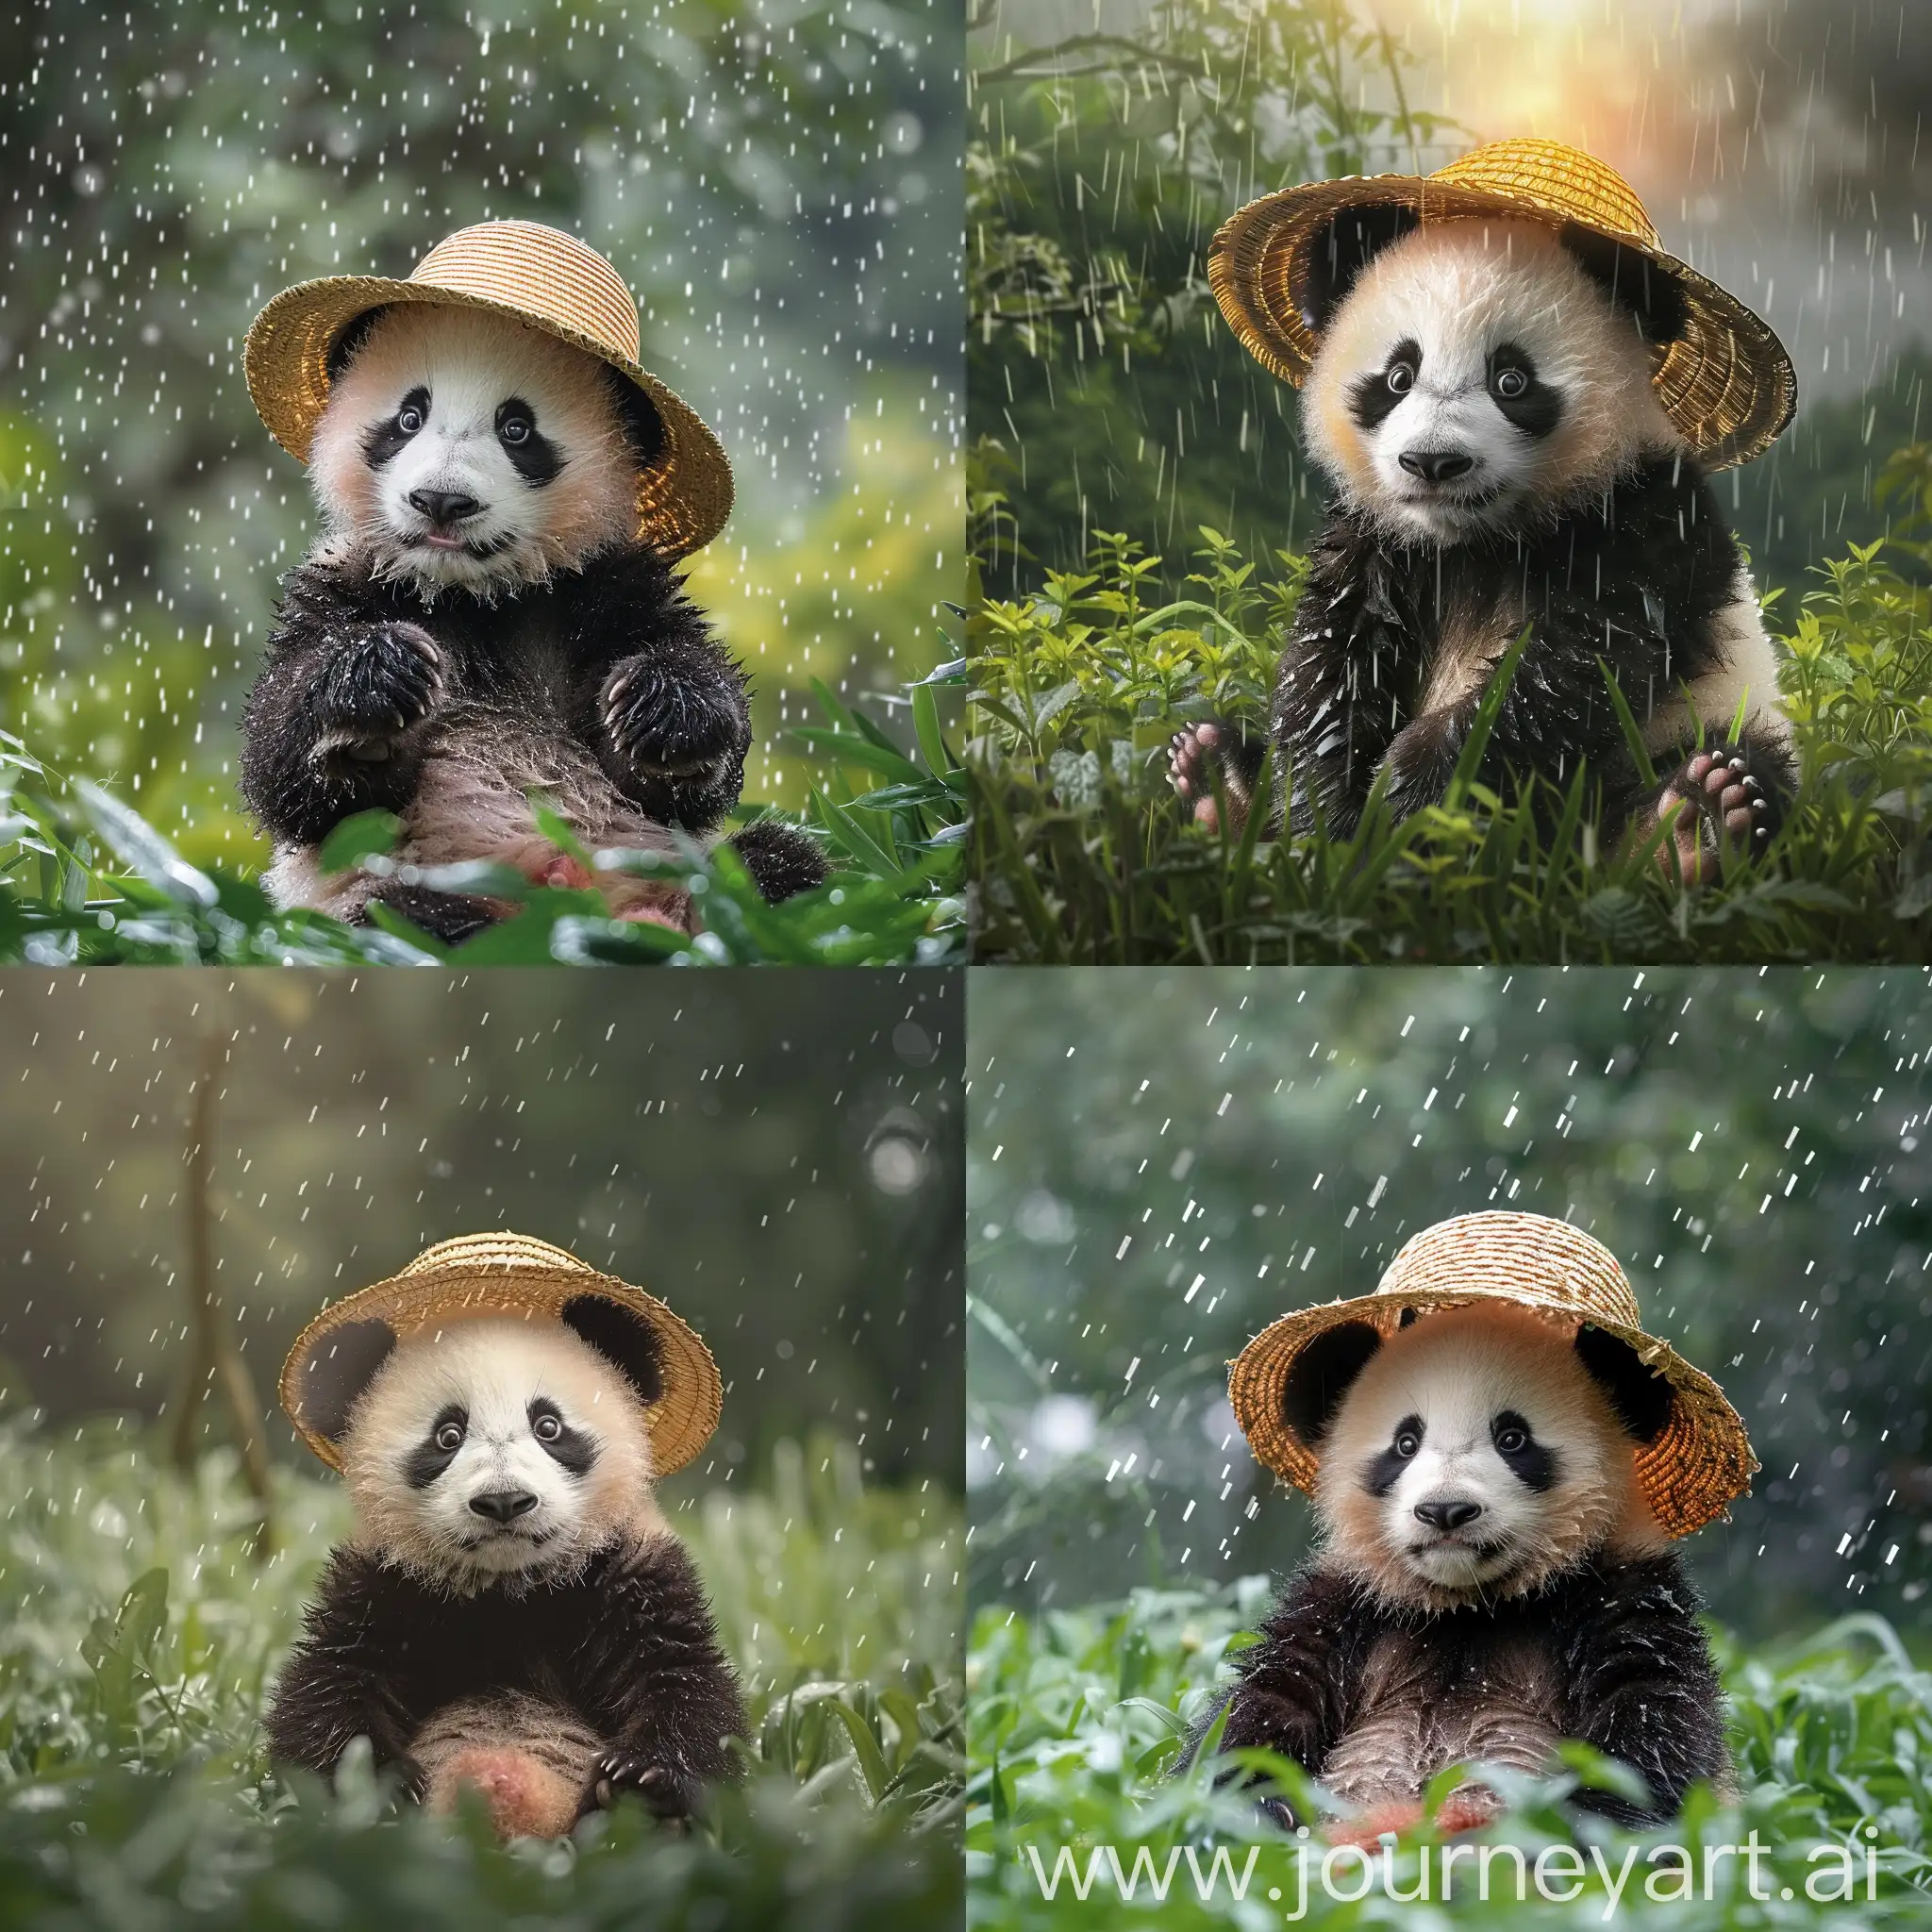 cute baby panda with straw hat sitting in a green field during a light rain